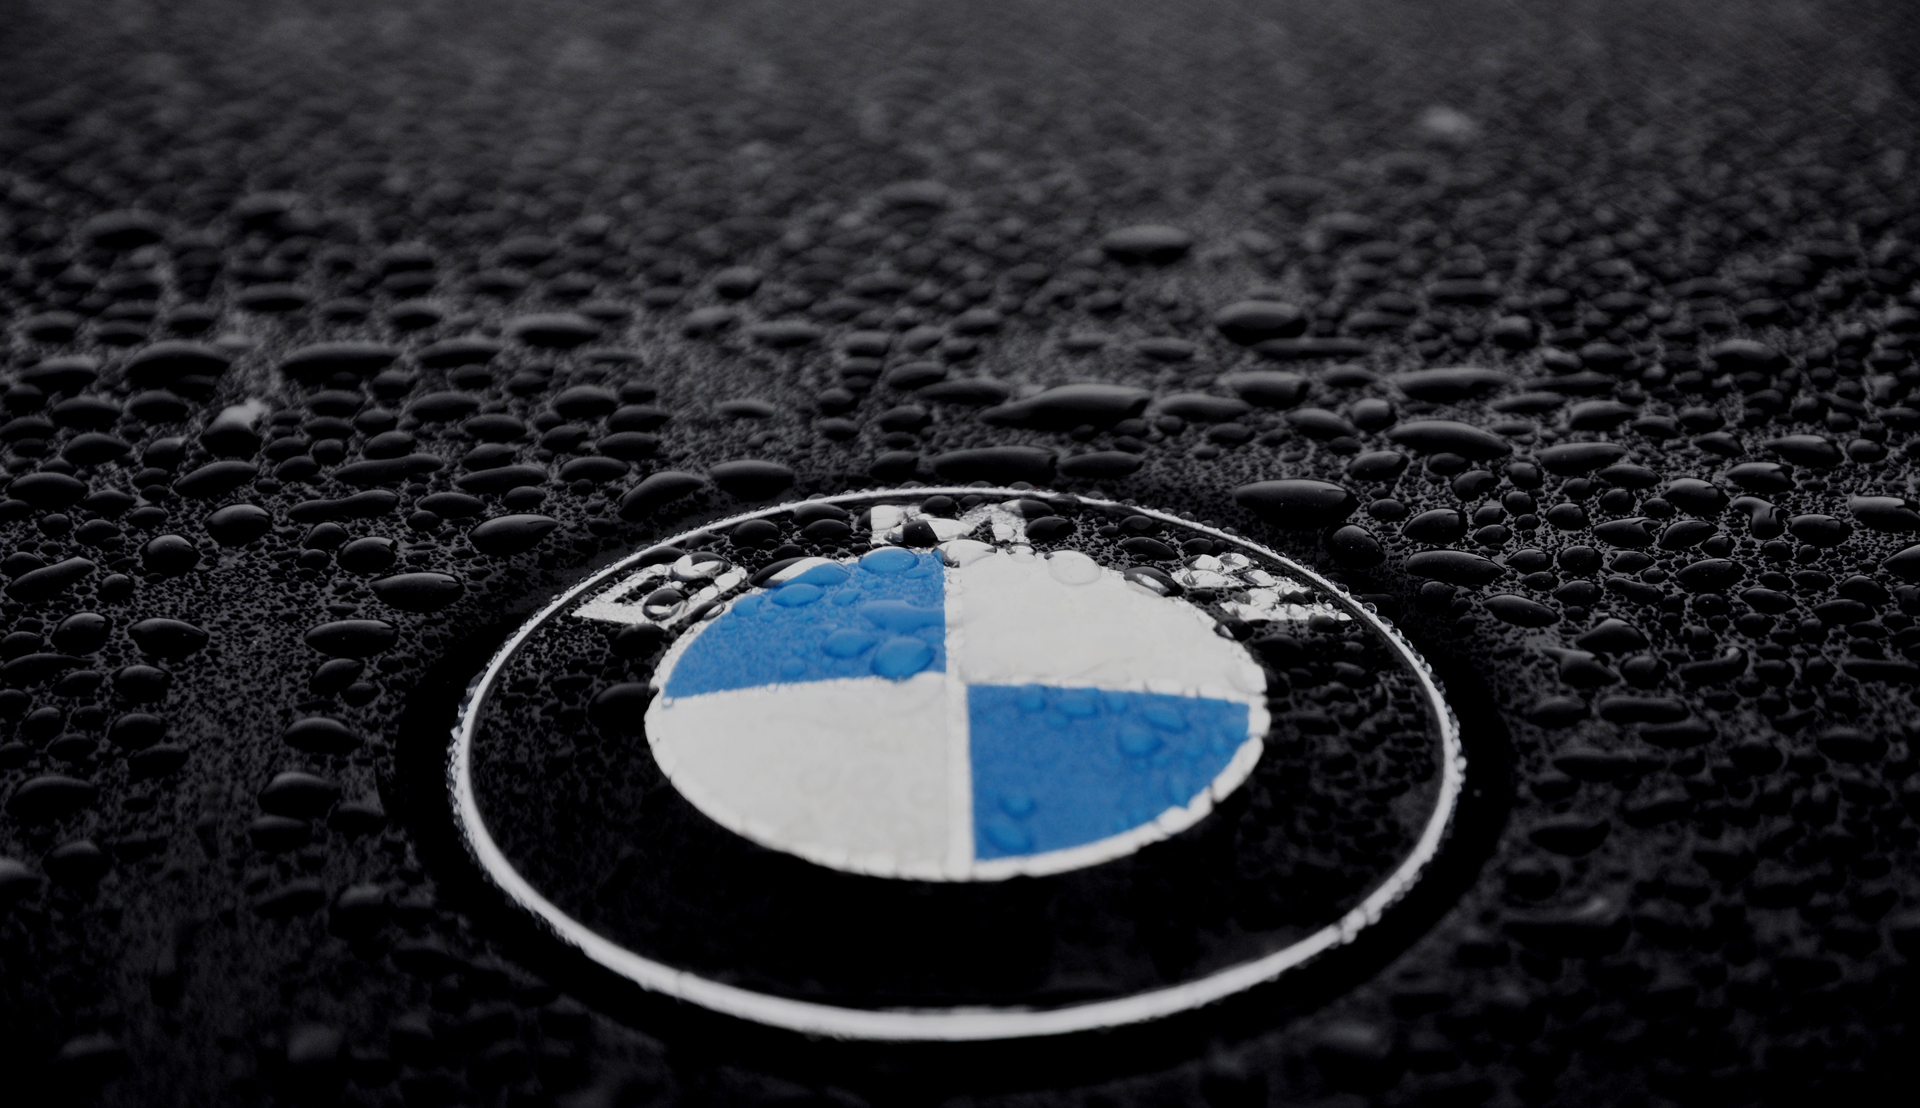 Bmw Logo Wallpapers Pictures Images HD Wallpapers Download Free Images Wallpaper [wallpaper981.blogspot.com]